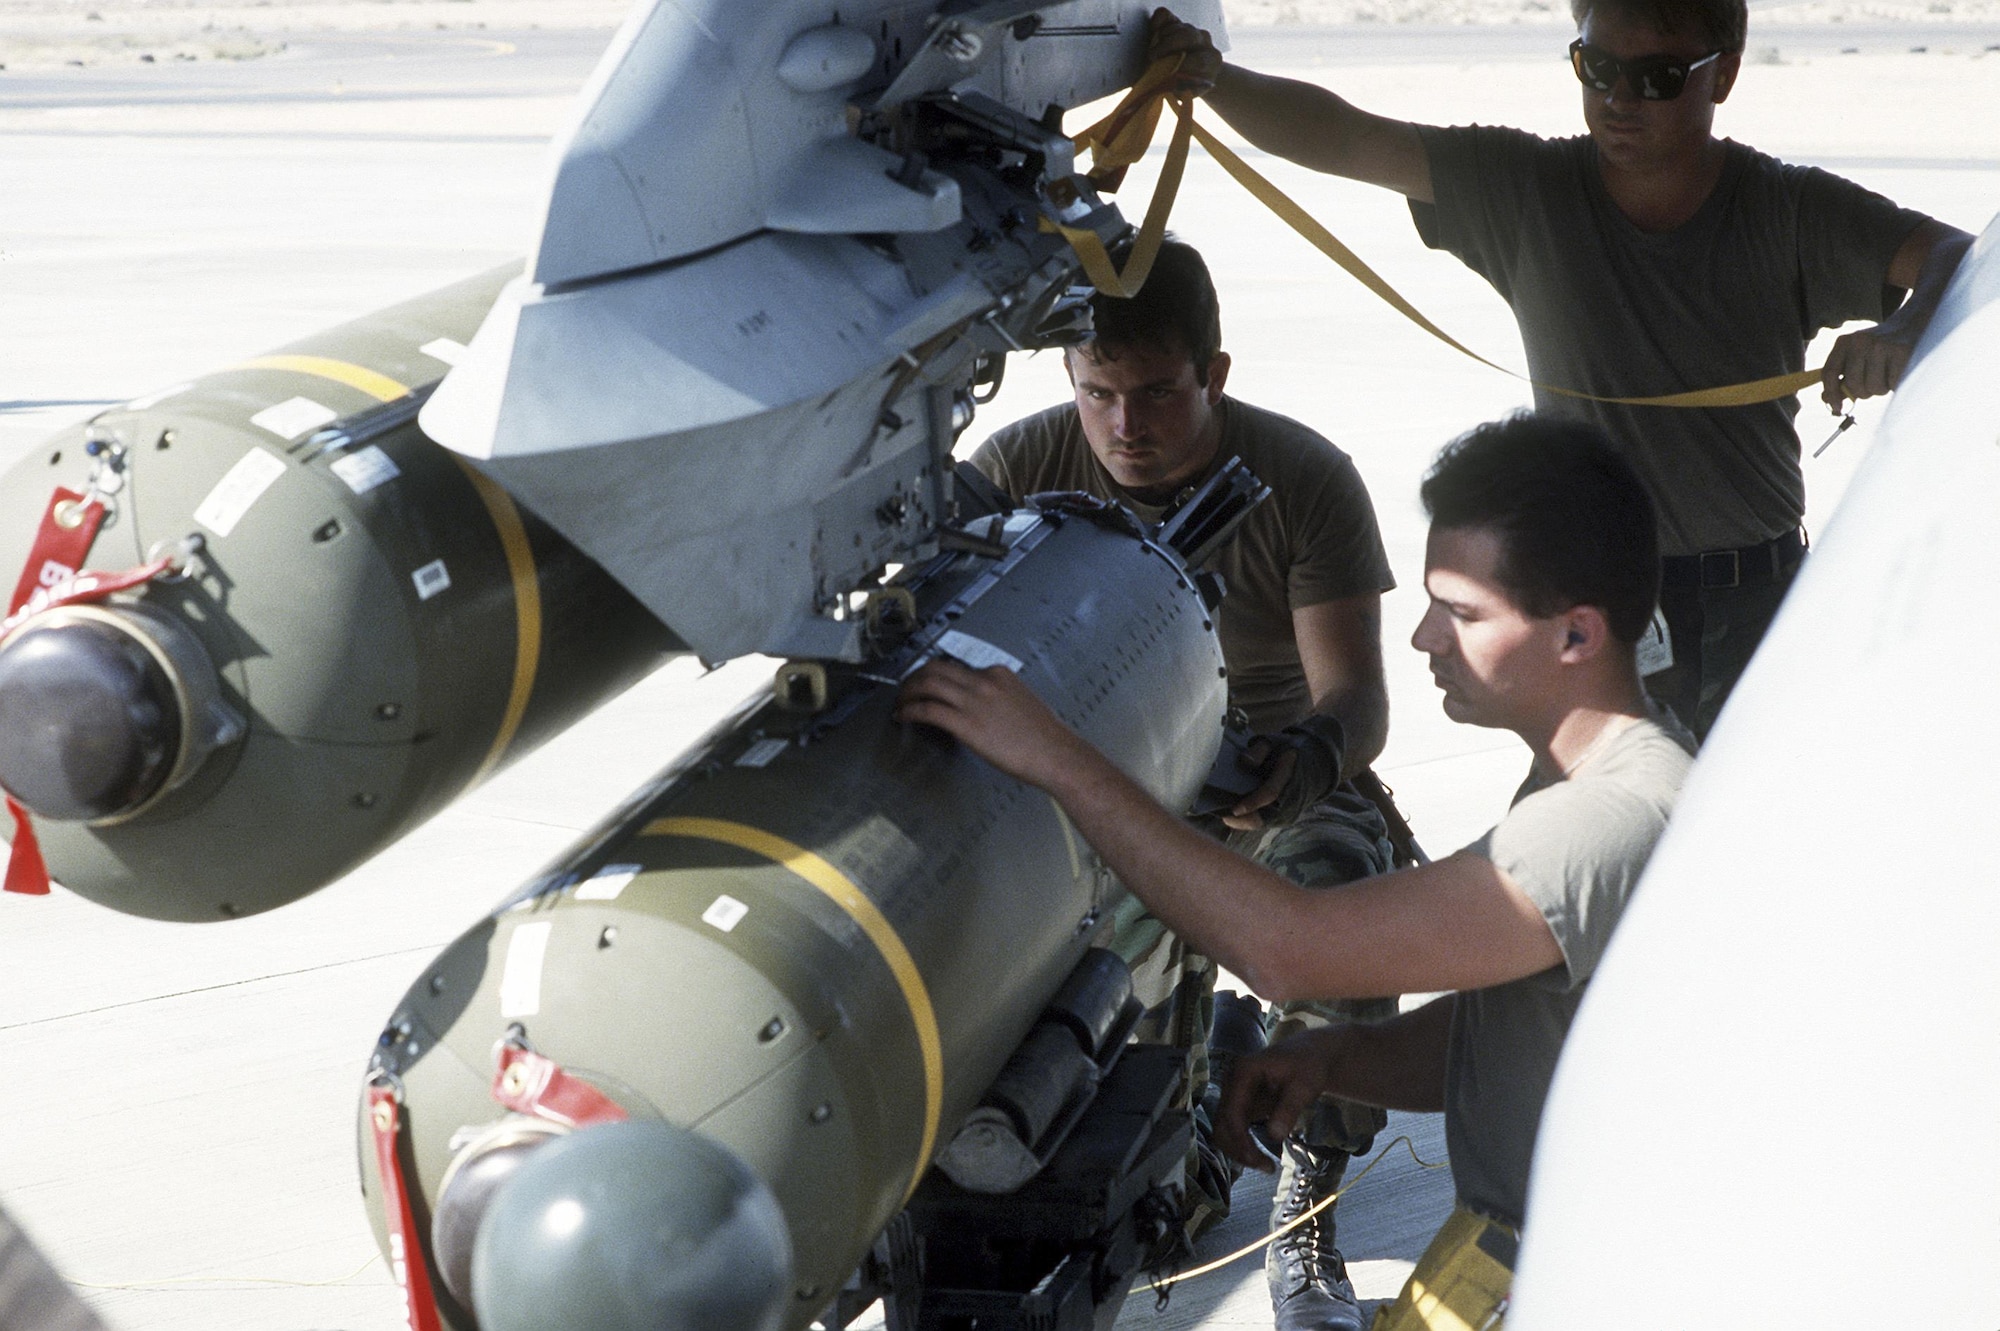 Members of the 4th Weapons Squadron load SUU-65/B tactical munitions dispensers onto an aircraft as they ready it for a mission during Operation Desert Shield. (U.S. Air Force photo)